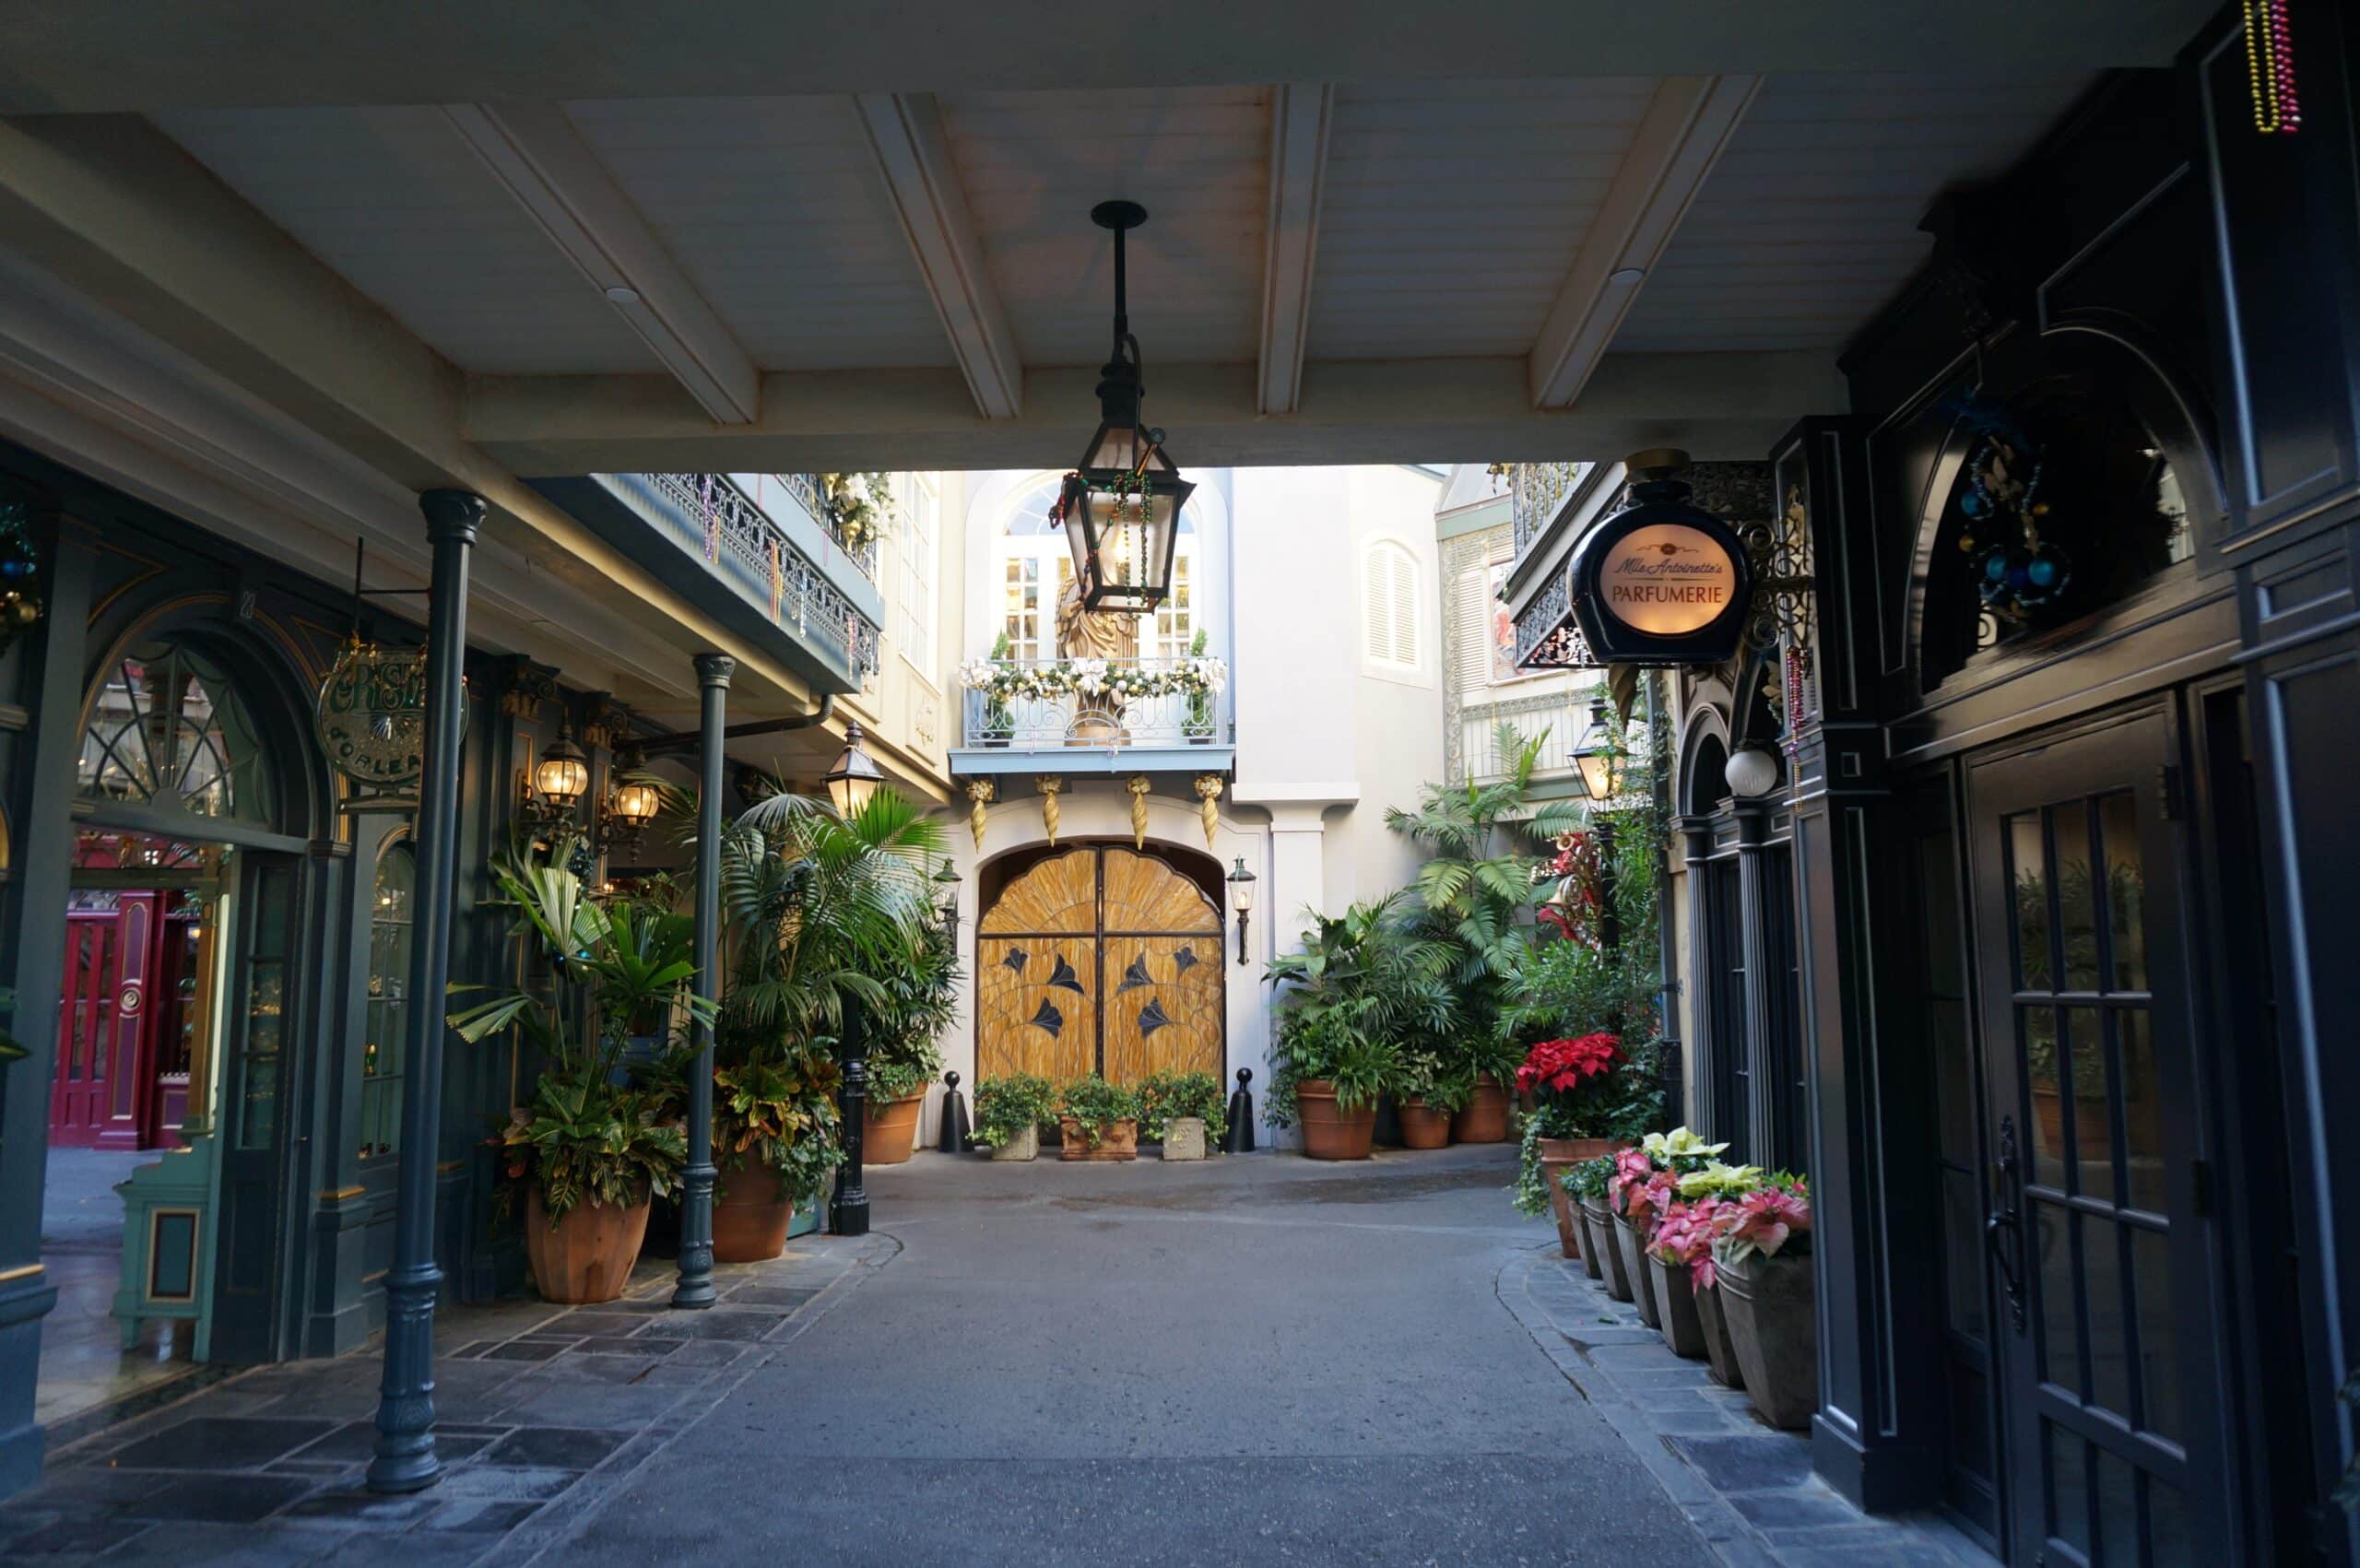 Lands In Pictures: New Orleans Square - Duchess of Disneyland